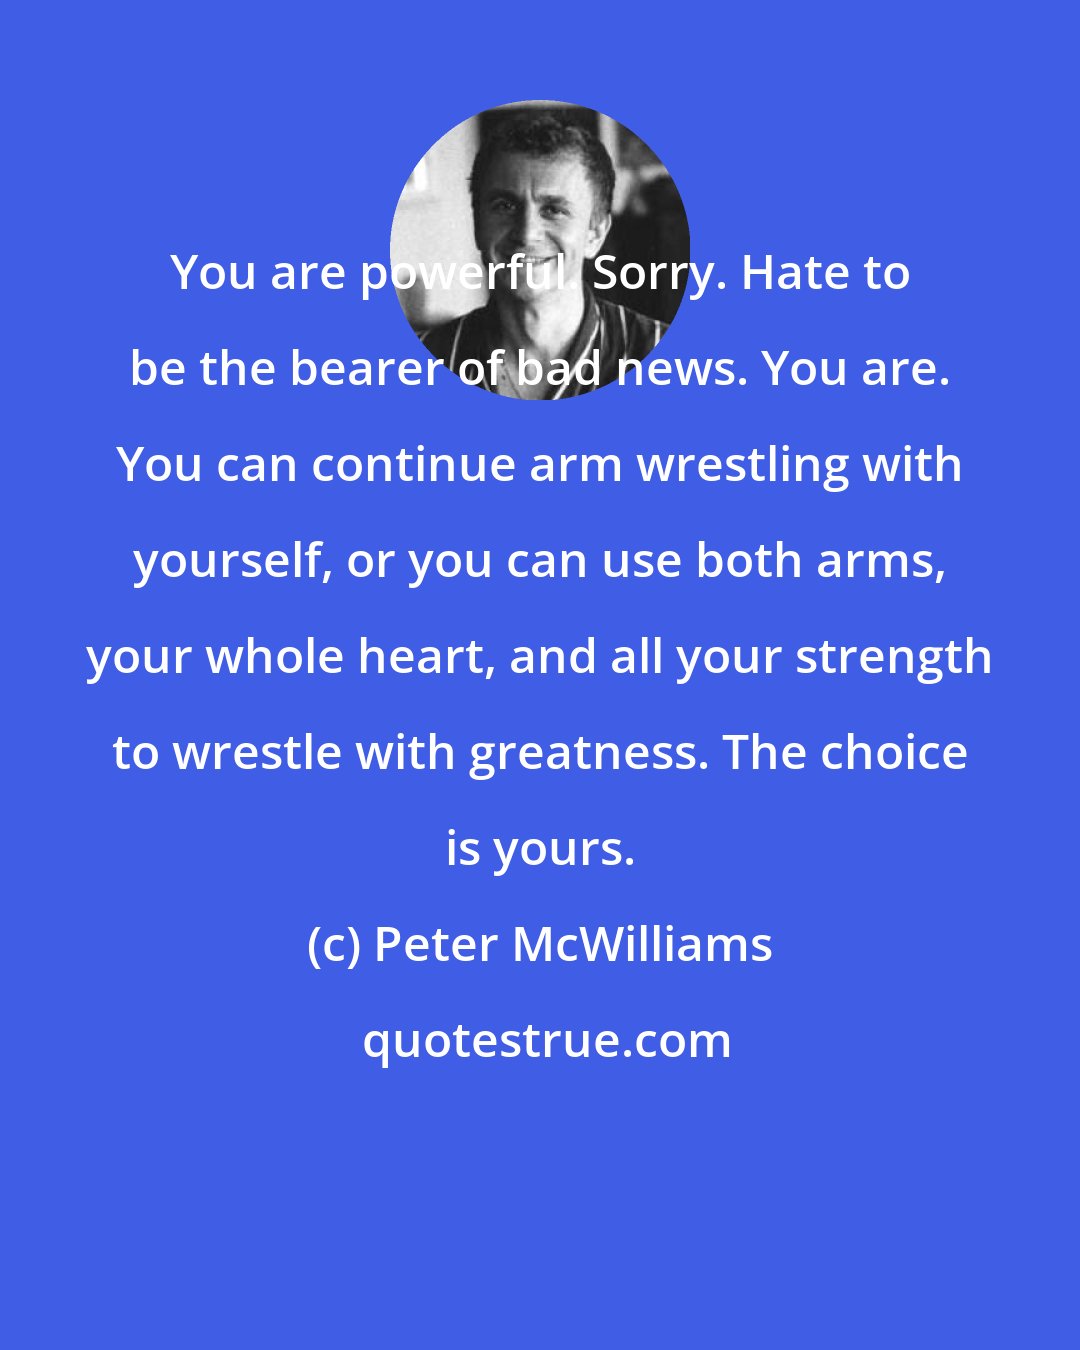 Peter McWilliams: You are powerful. Sorry. Hate to be the bearer of bad news. You are. You can continue arm wrestling with yourself, or you can use both arms, your whole heart, and all your strength to wrestle with greatness. The choice is yours.